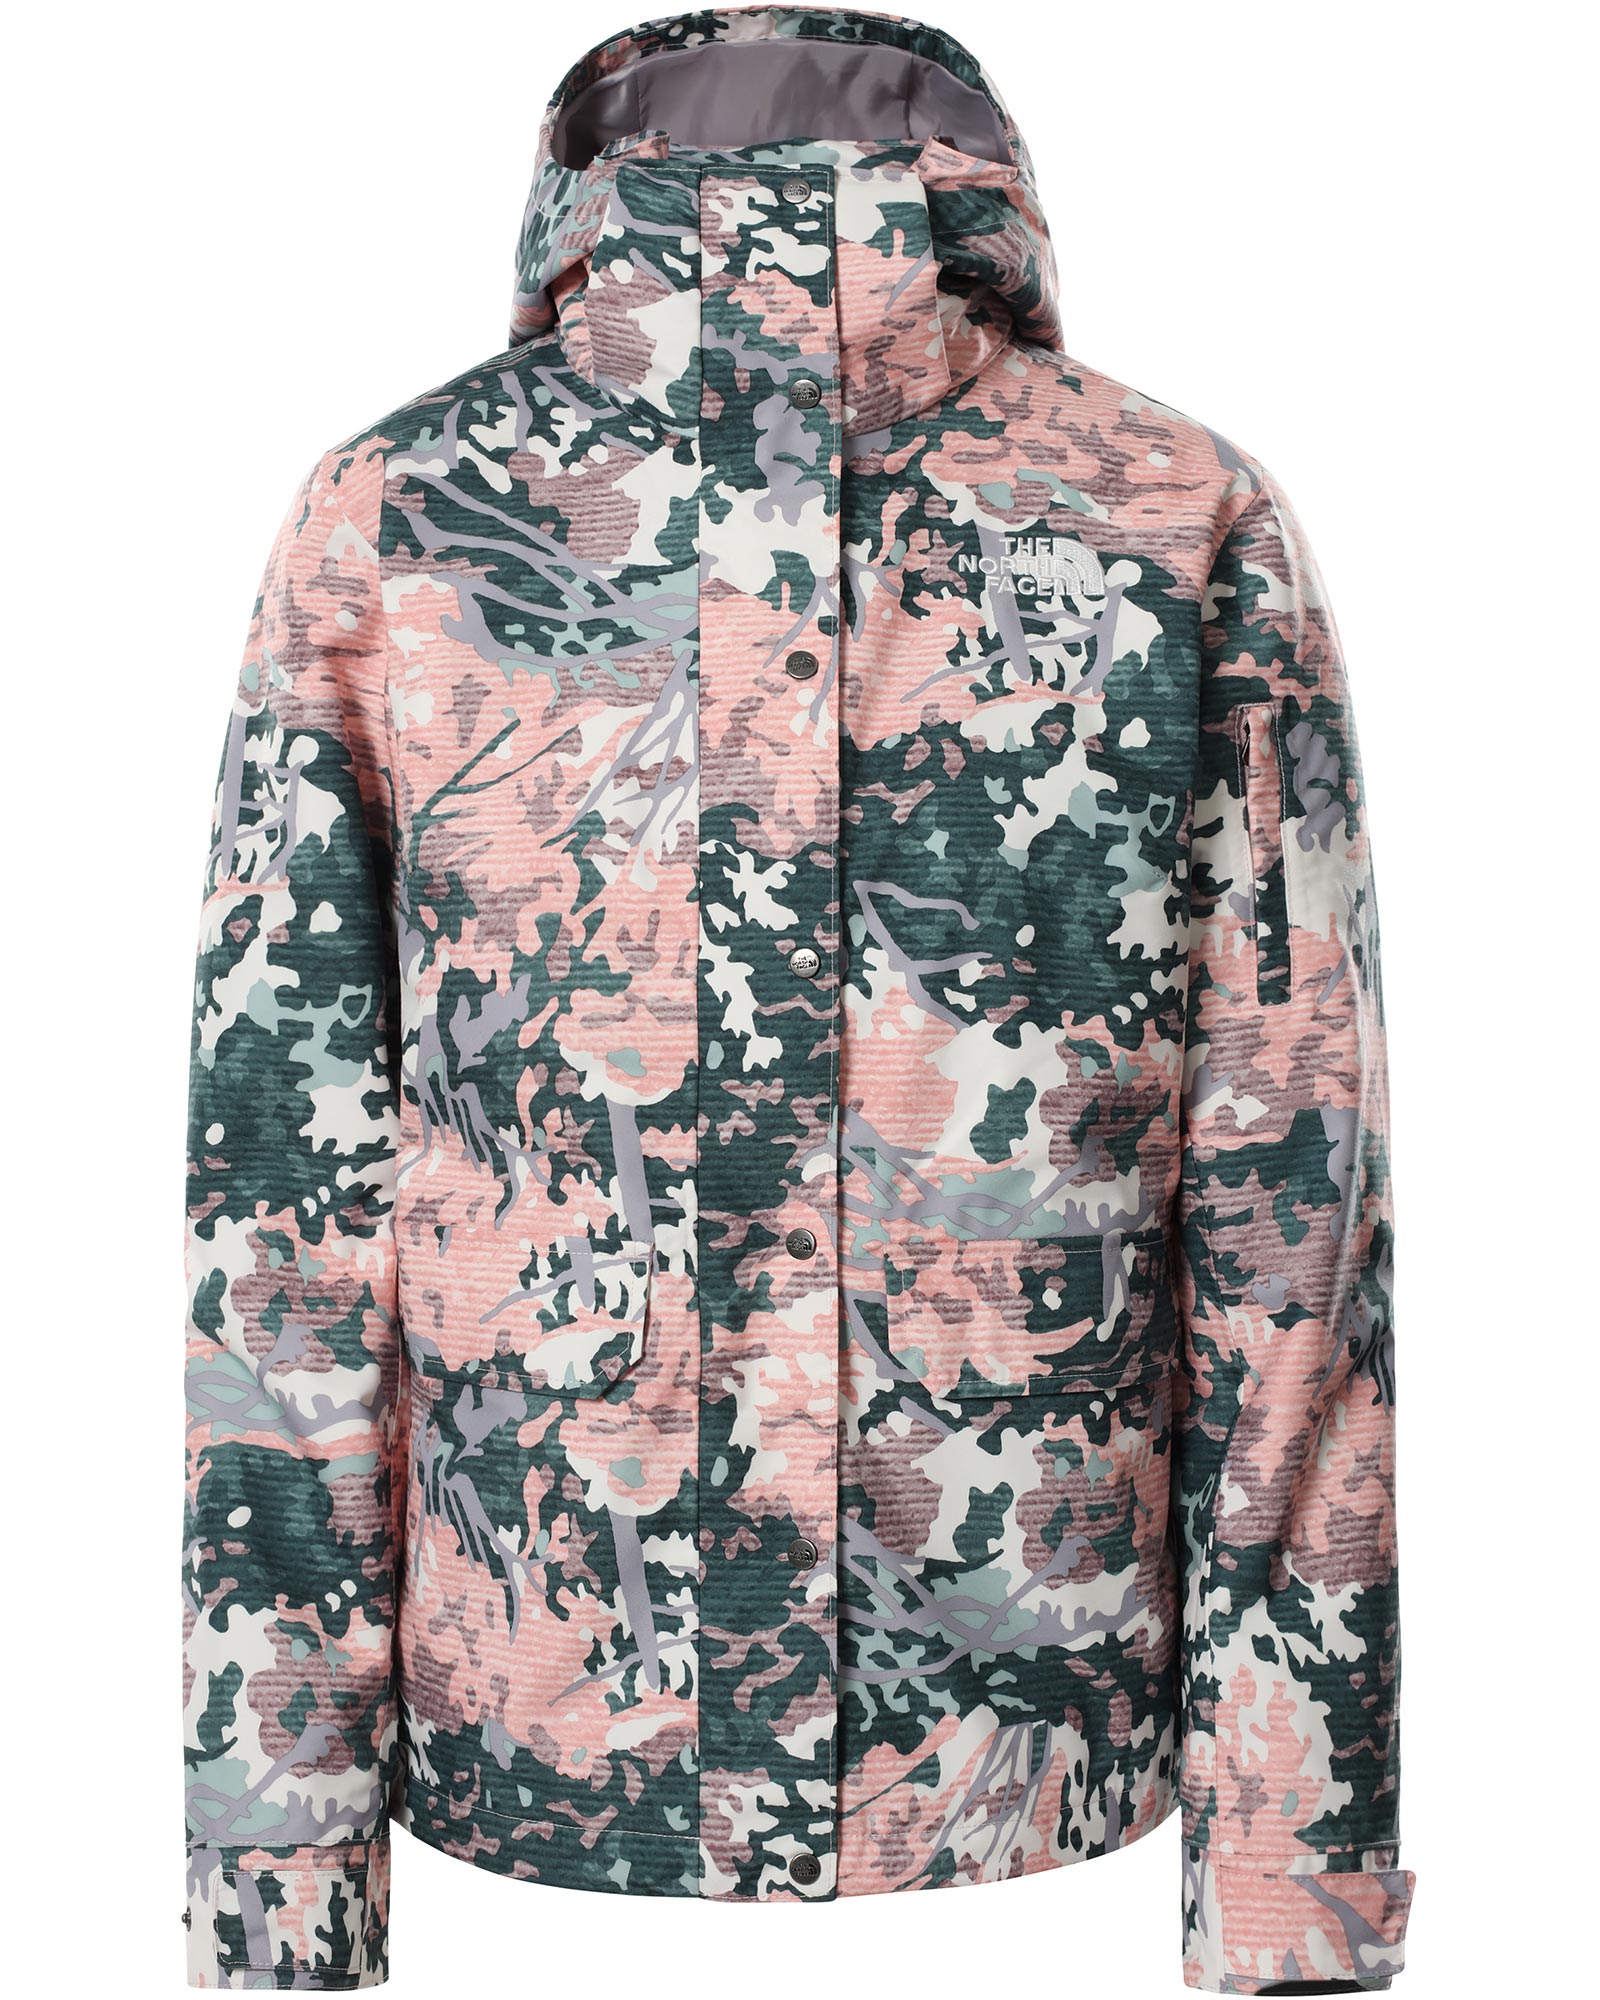 The North Face Print Pinecroft Women’s Triclimate Jacket - Laurel Wreath Green XS